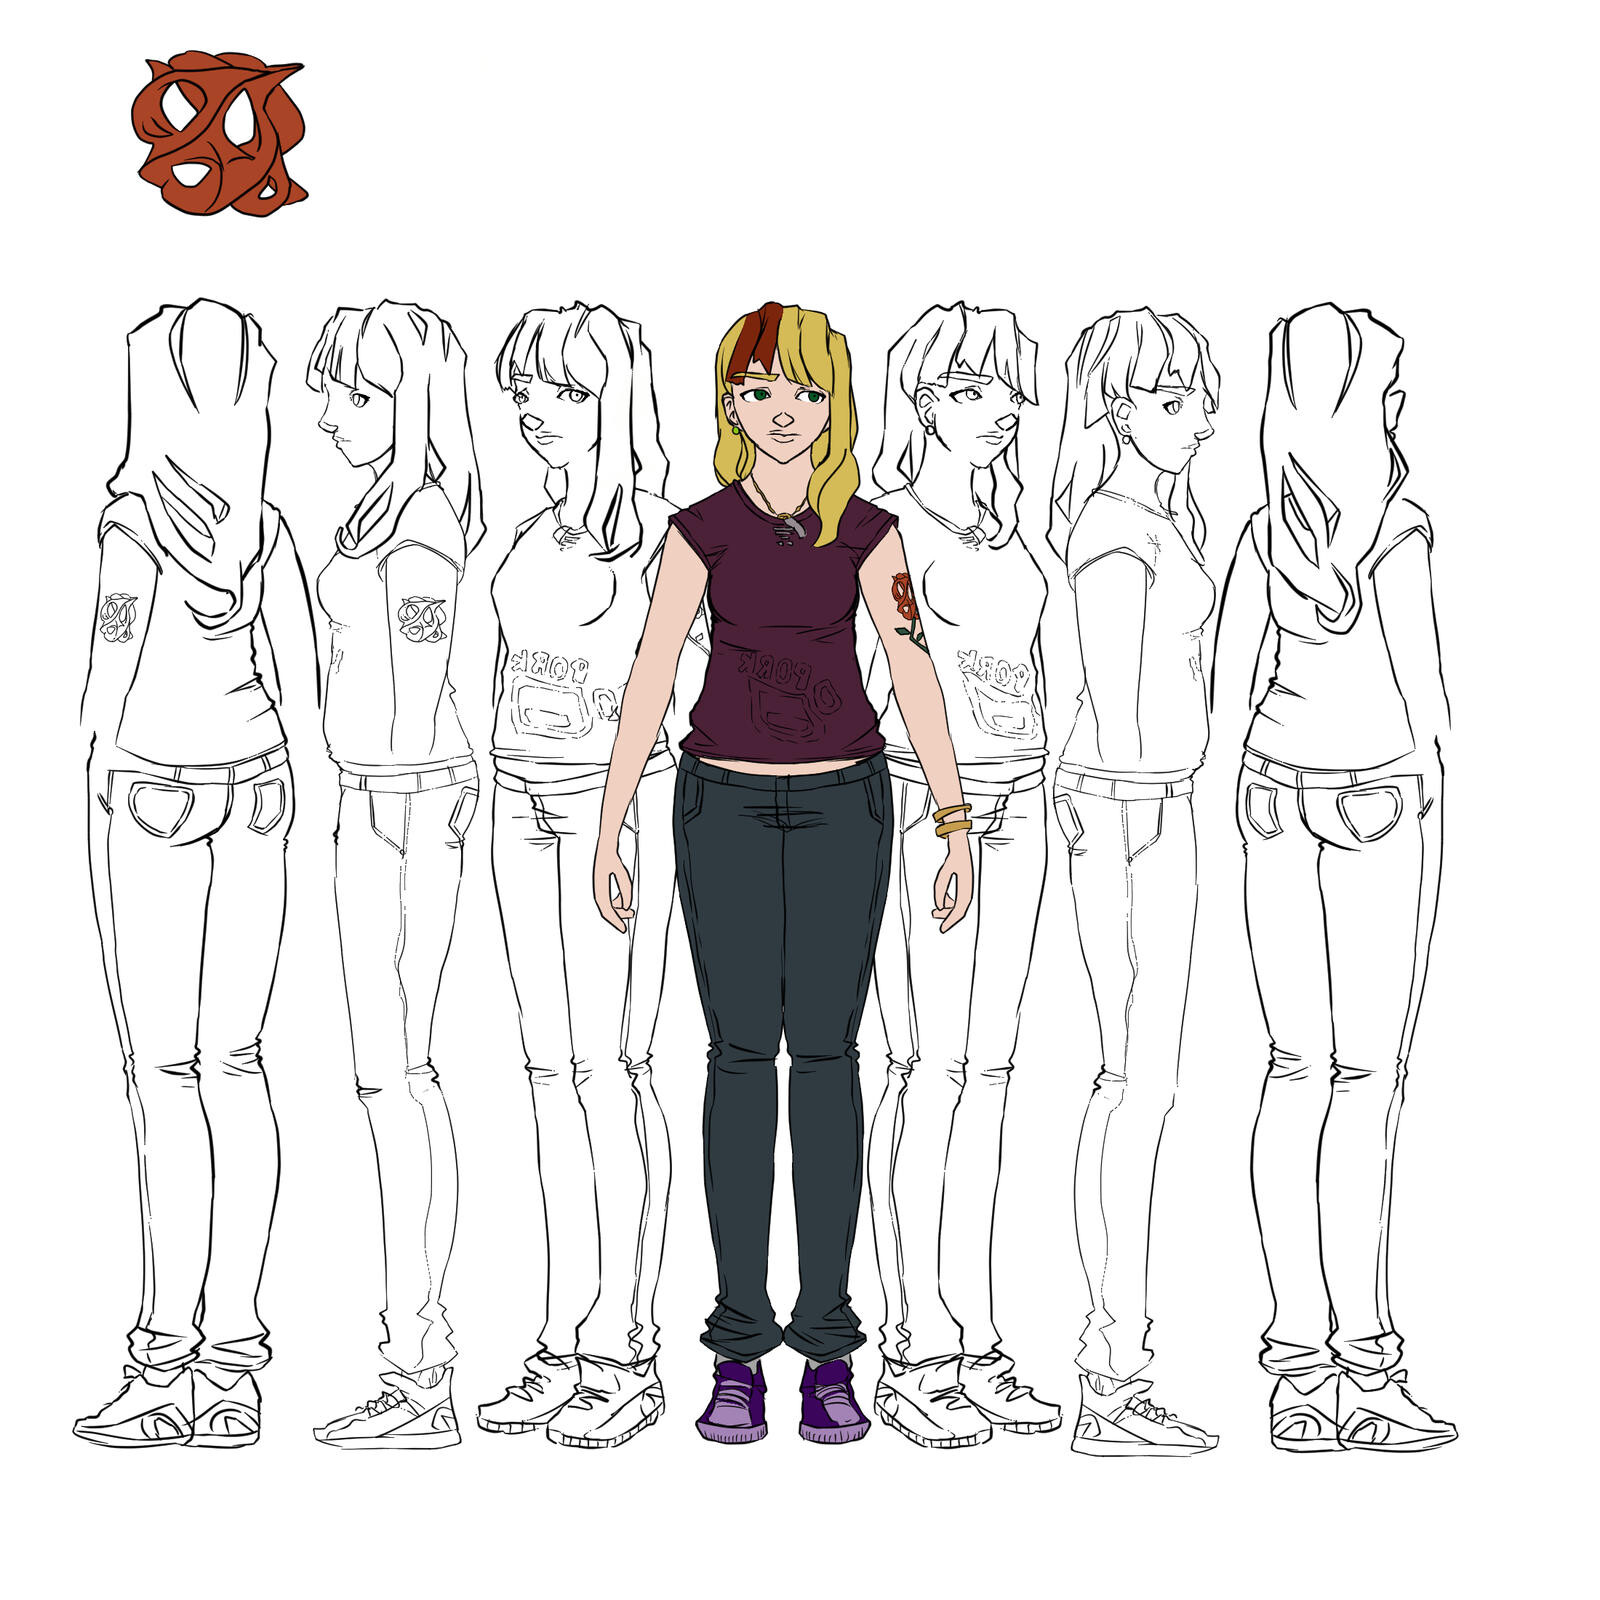 Character Sheet for the main character.